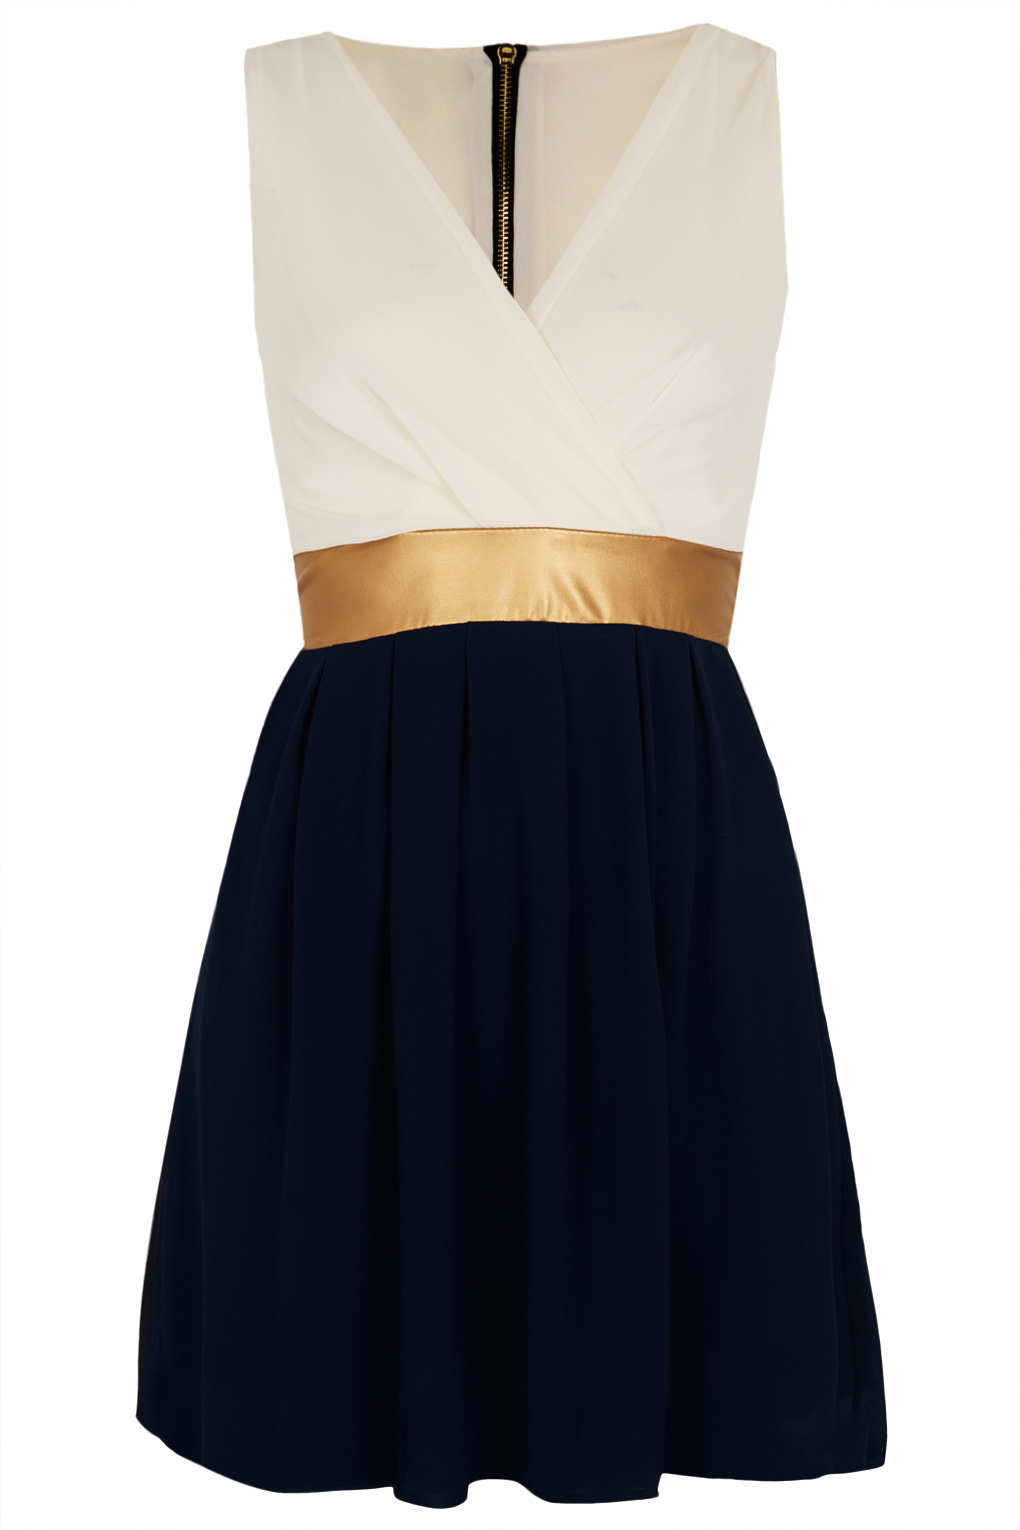 Topshop V Neck Metalic Dress By Wal G in Blue (NAVY BLUE) | Lyst